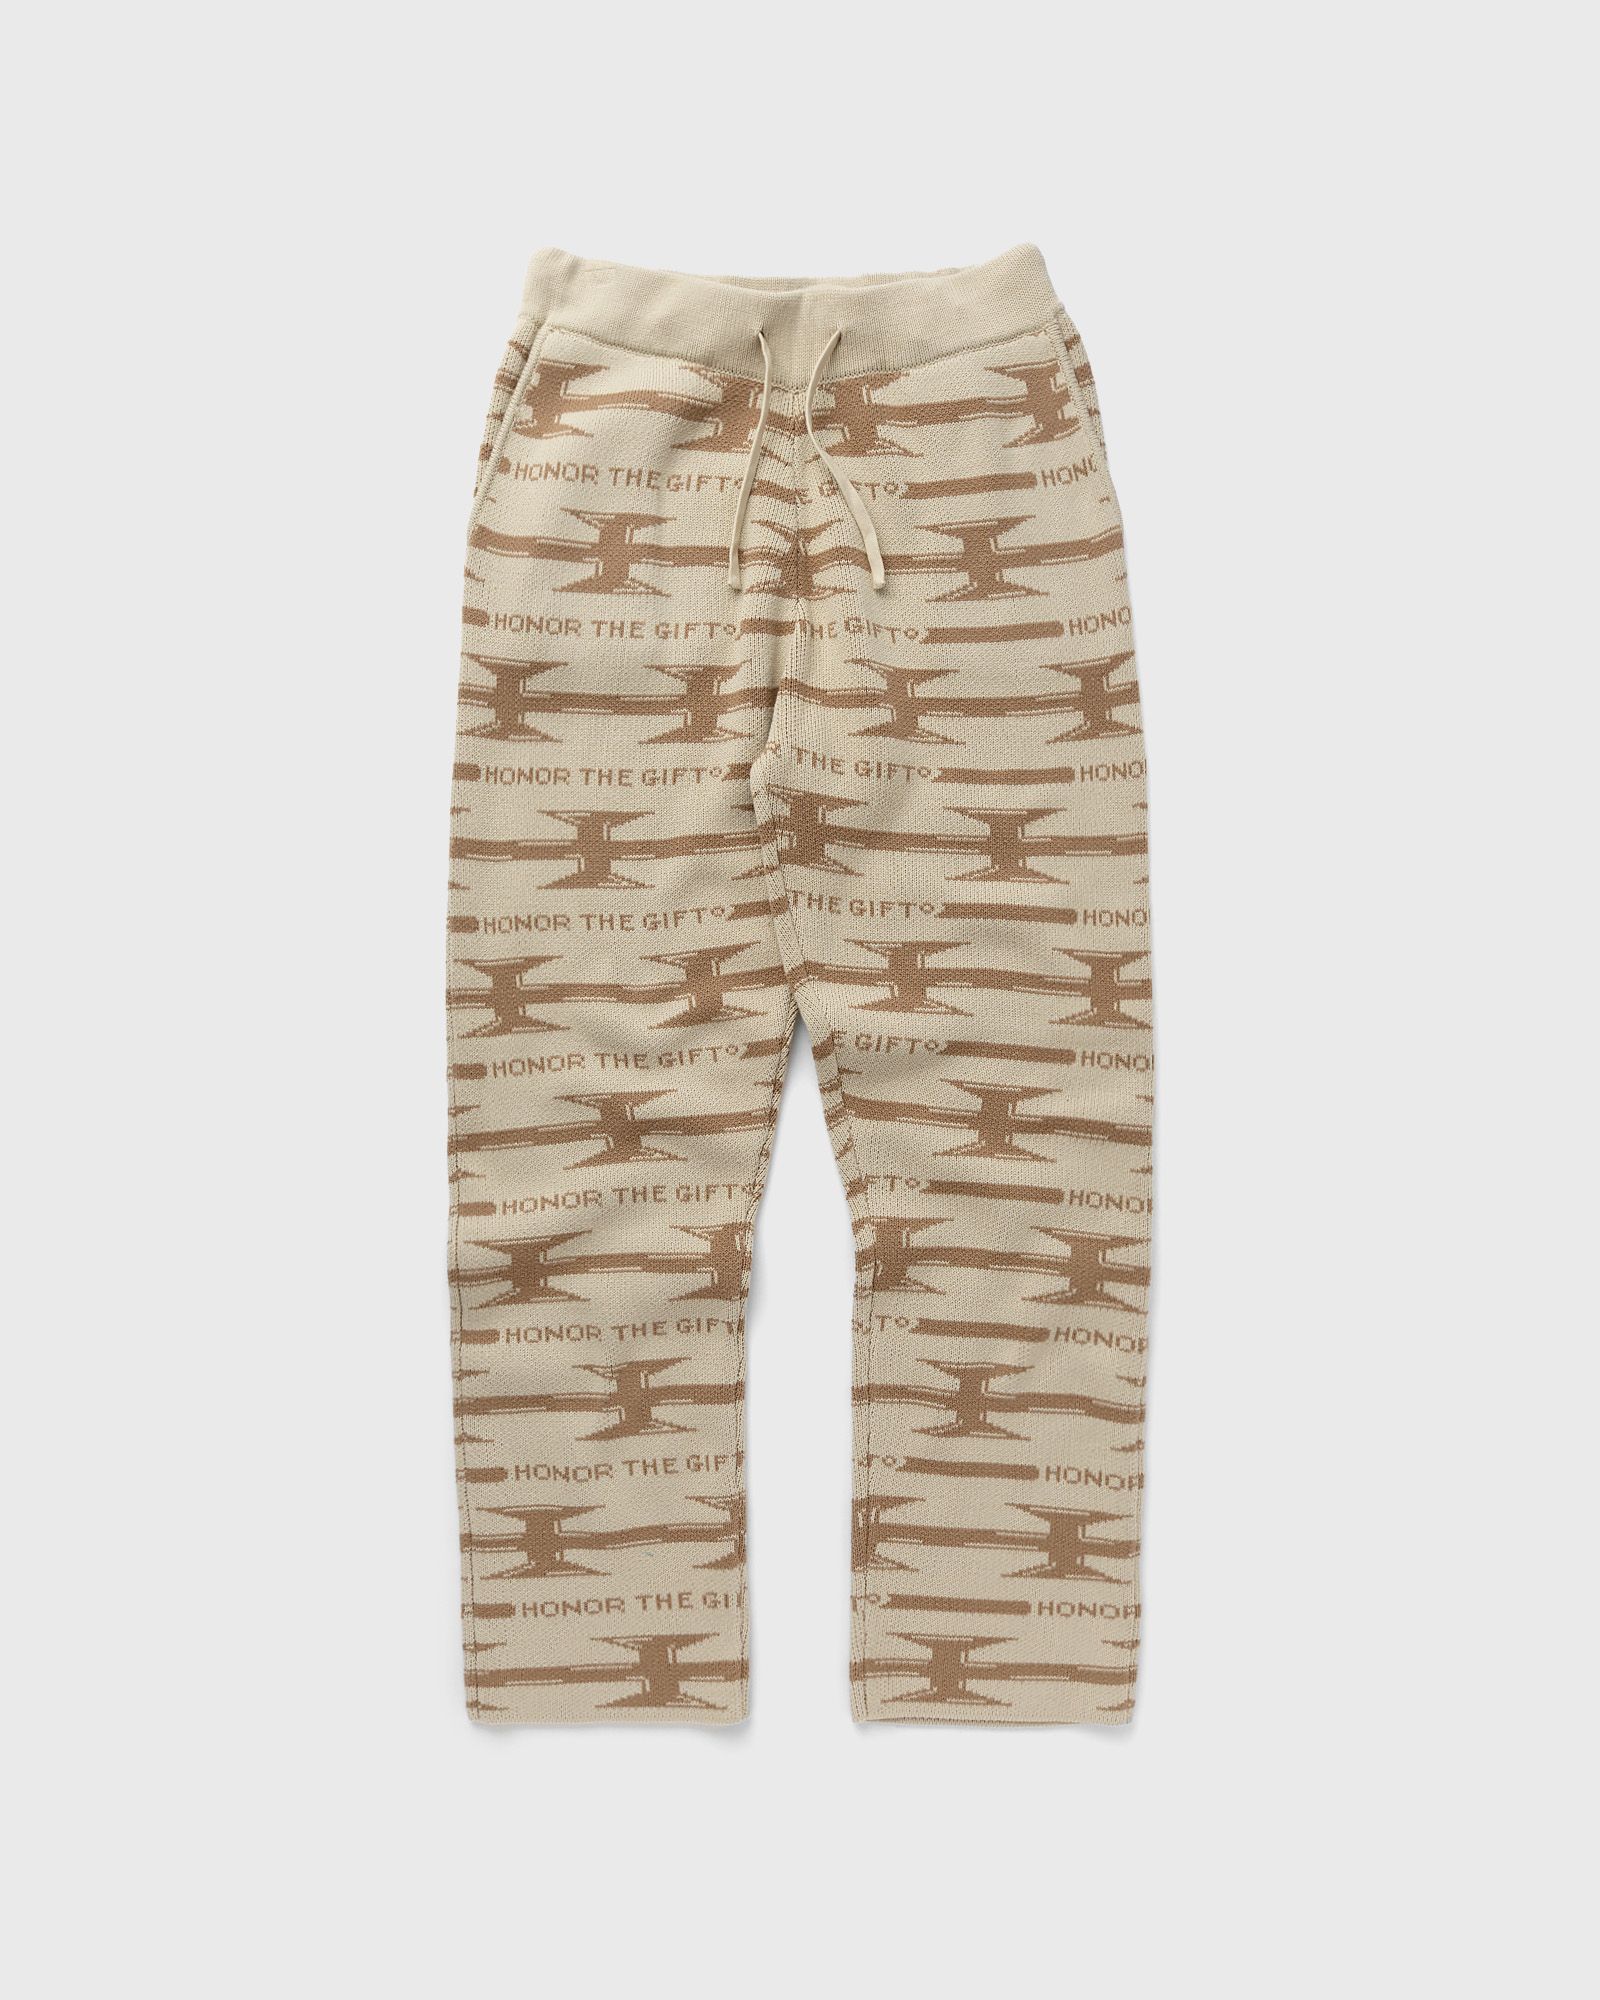 Honor The Gift - h wire knit pant men sweatpants beige in größe:m